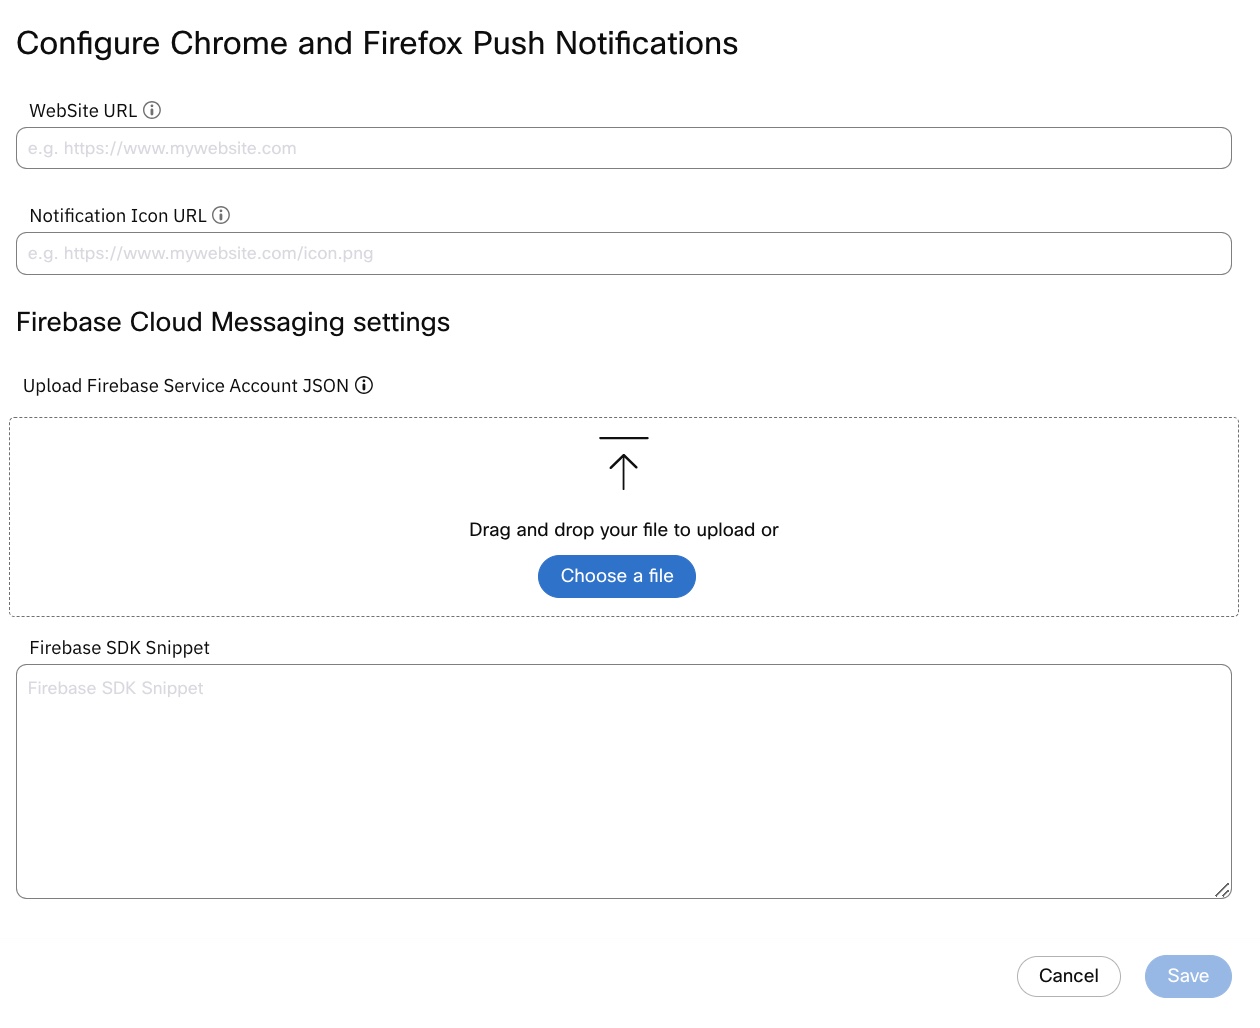 Configure Chrome and Firefox Push Notifications